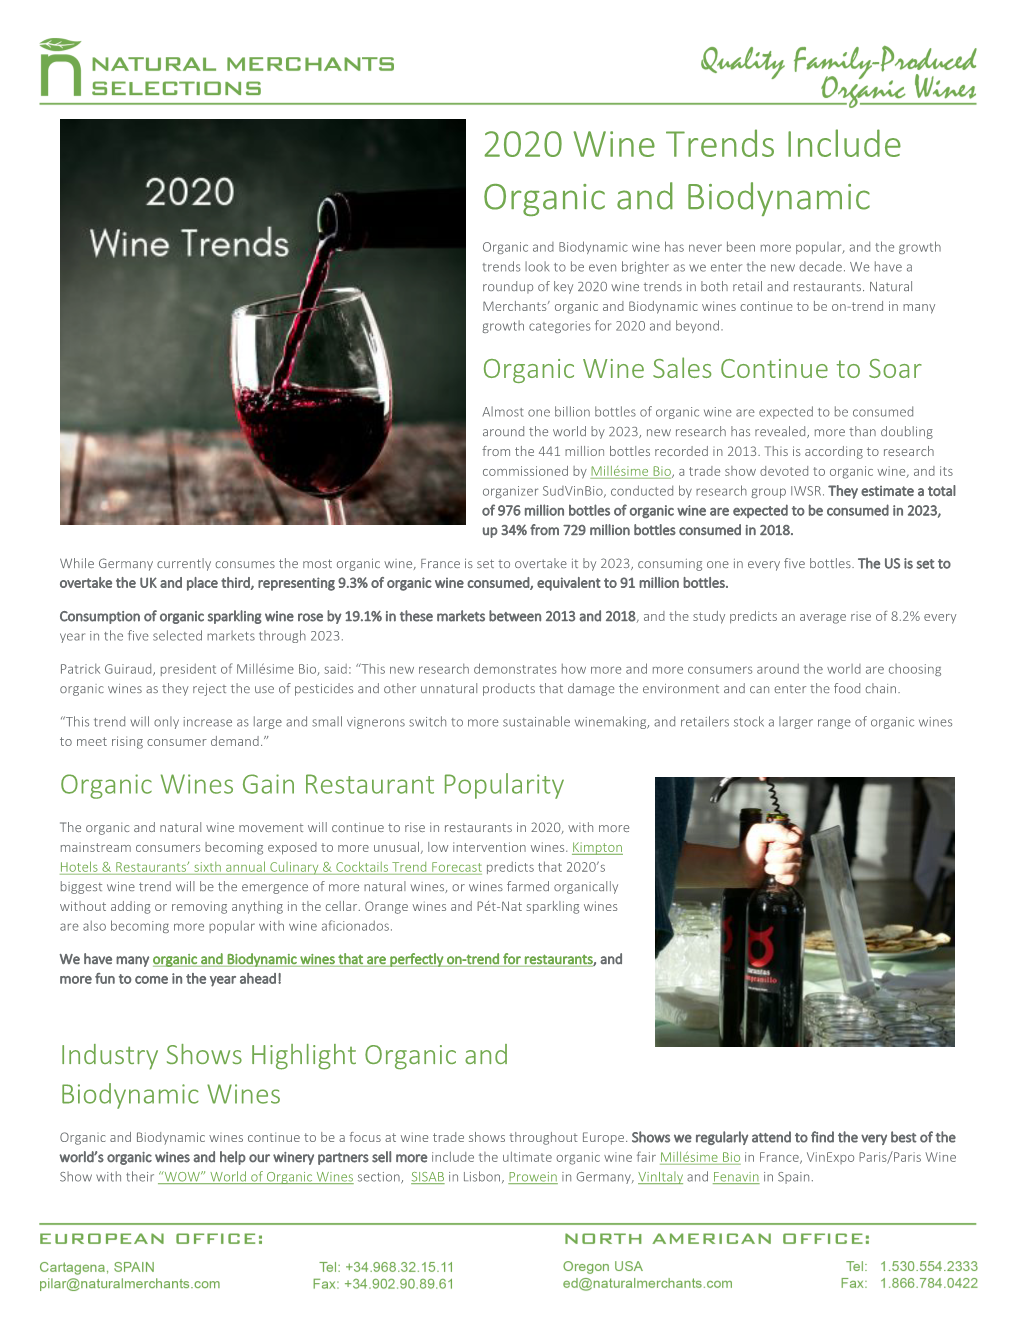 2020 Wine Trends Include Organic and Biodynamic